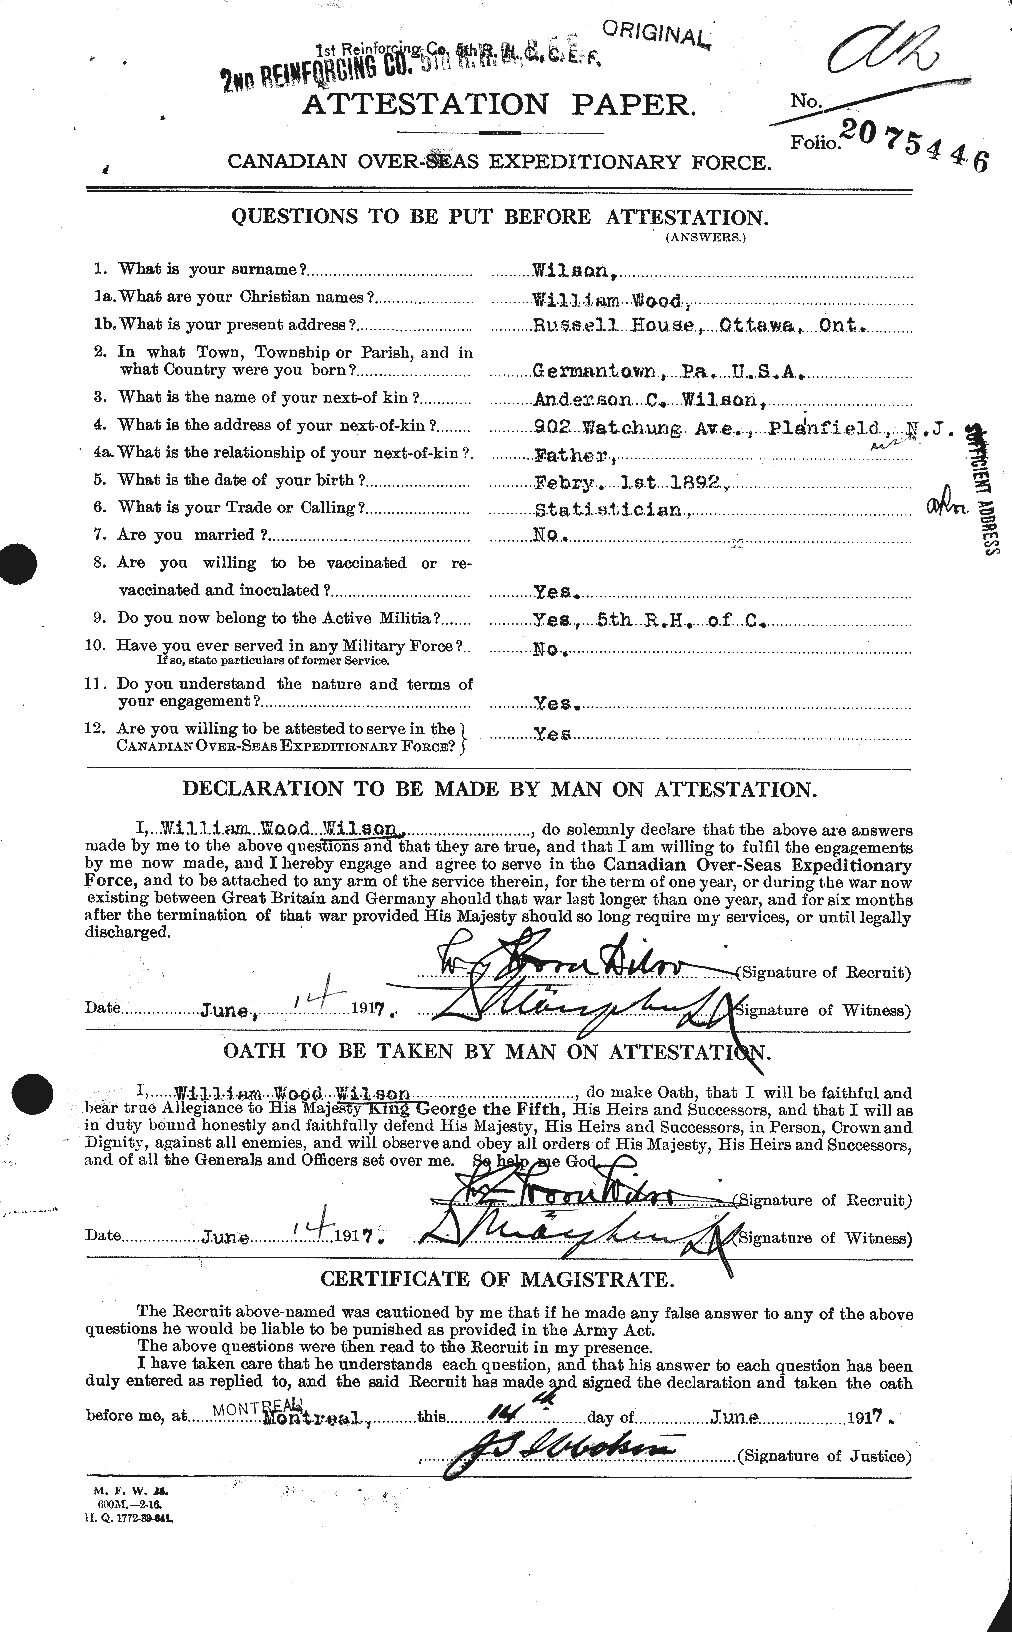 Personnel Records of the First World War - CEF 684120a